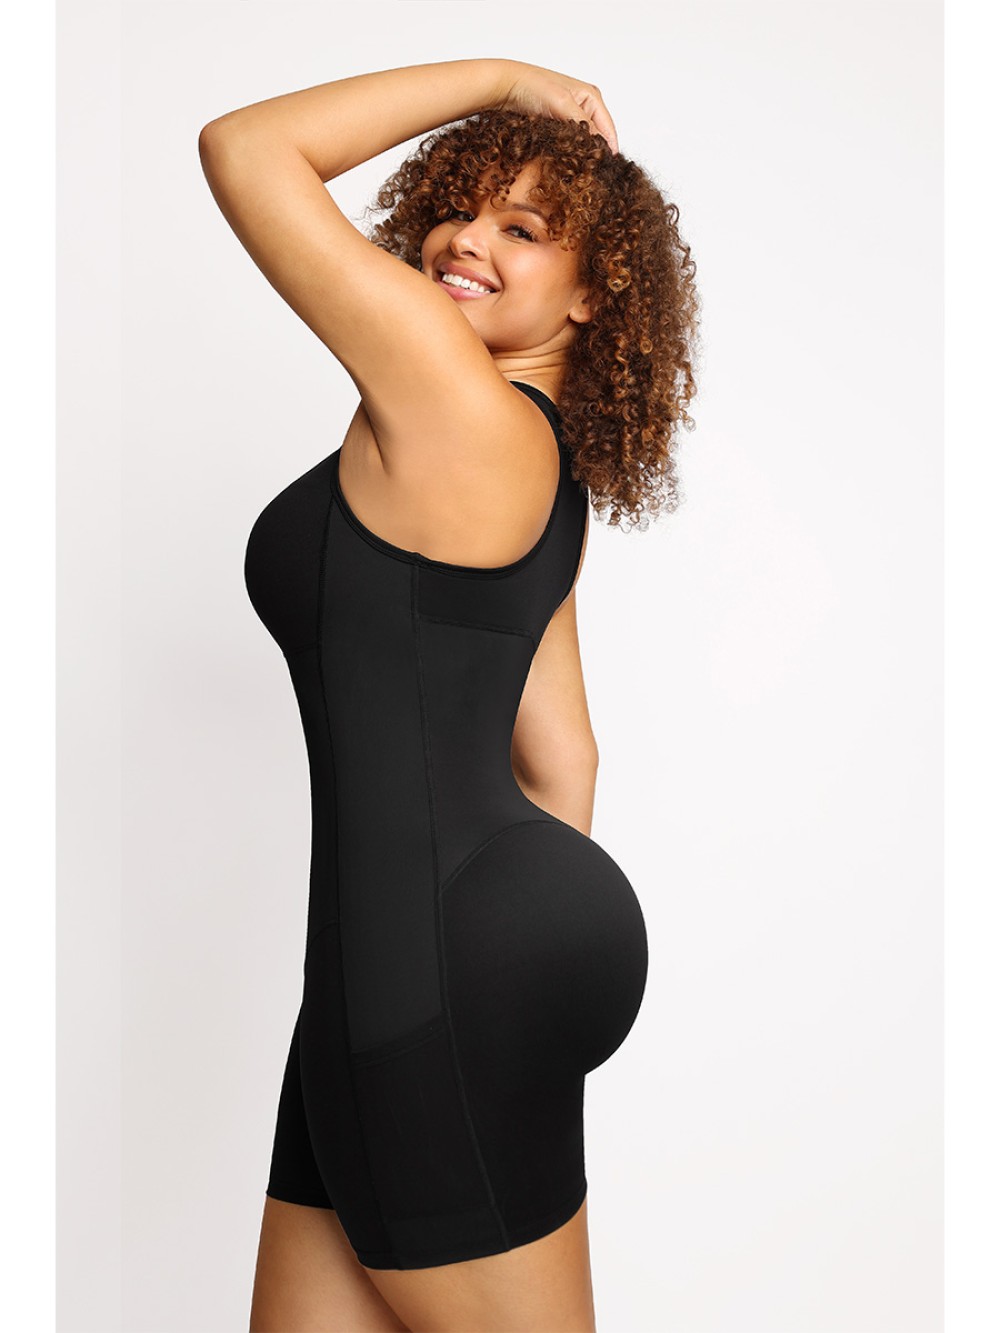 Built-in Removable Bra Pads Body Shaper With Pockets